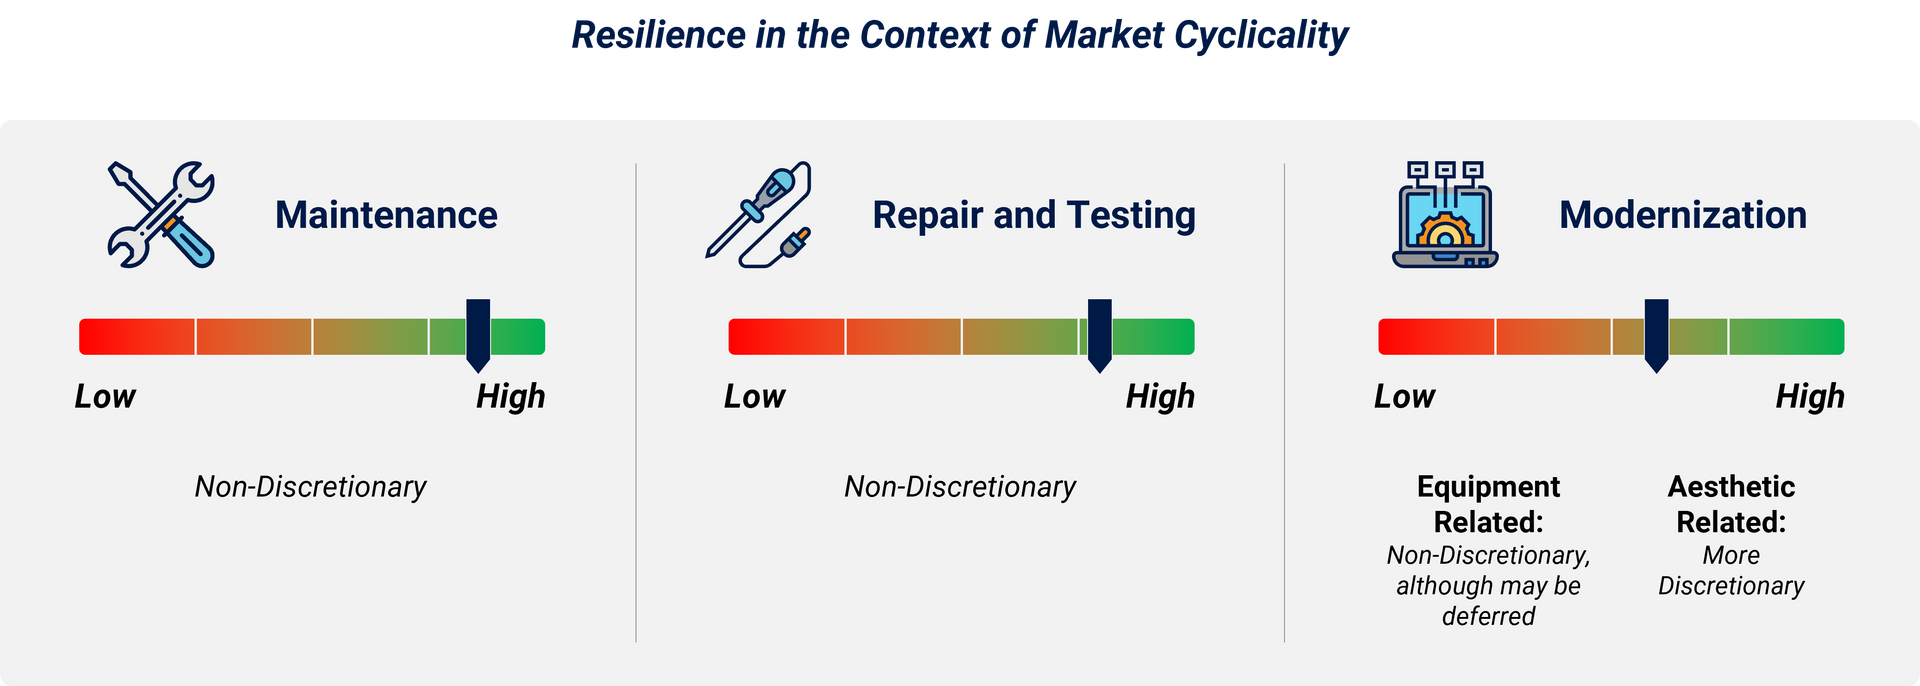 Resilience in the context of market volatility graphic. Resilience for maintenance remains high, resilience for repair and testing is also high, and resilience to modernization is high for equipment related resilience while for aesthetic modernization, resilience is lower. 